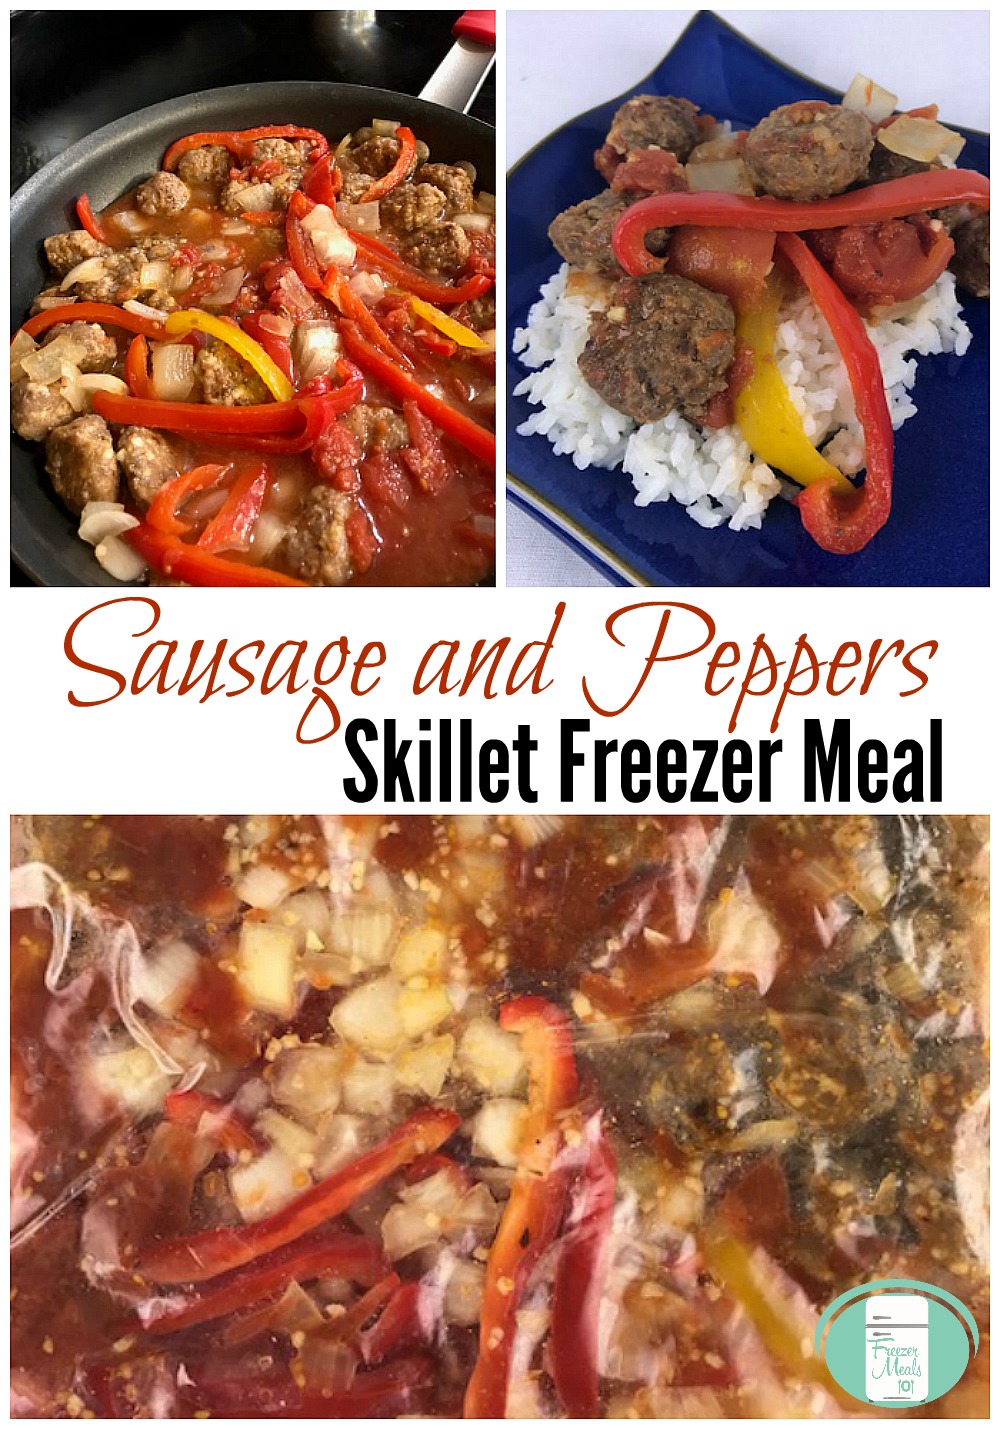 Sausage and Peppers Skillet Freezer Meal